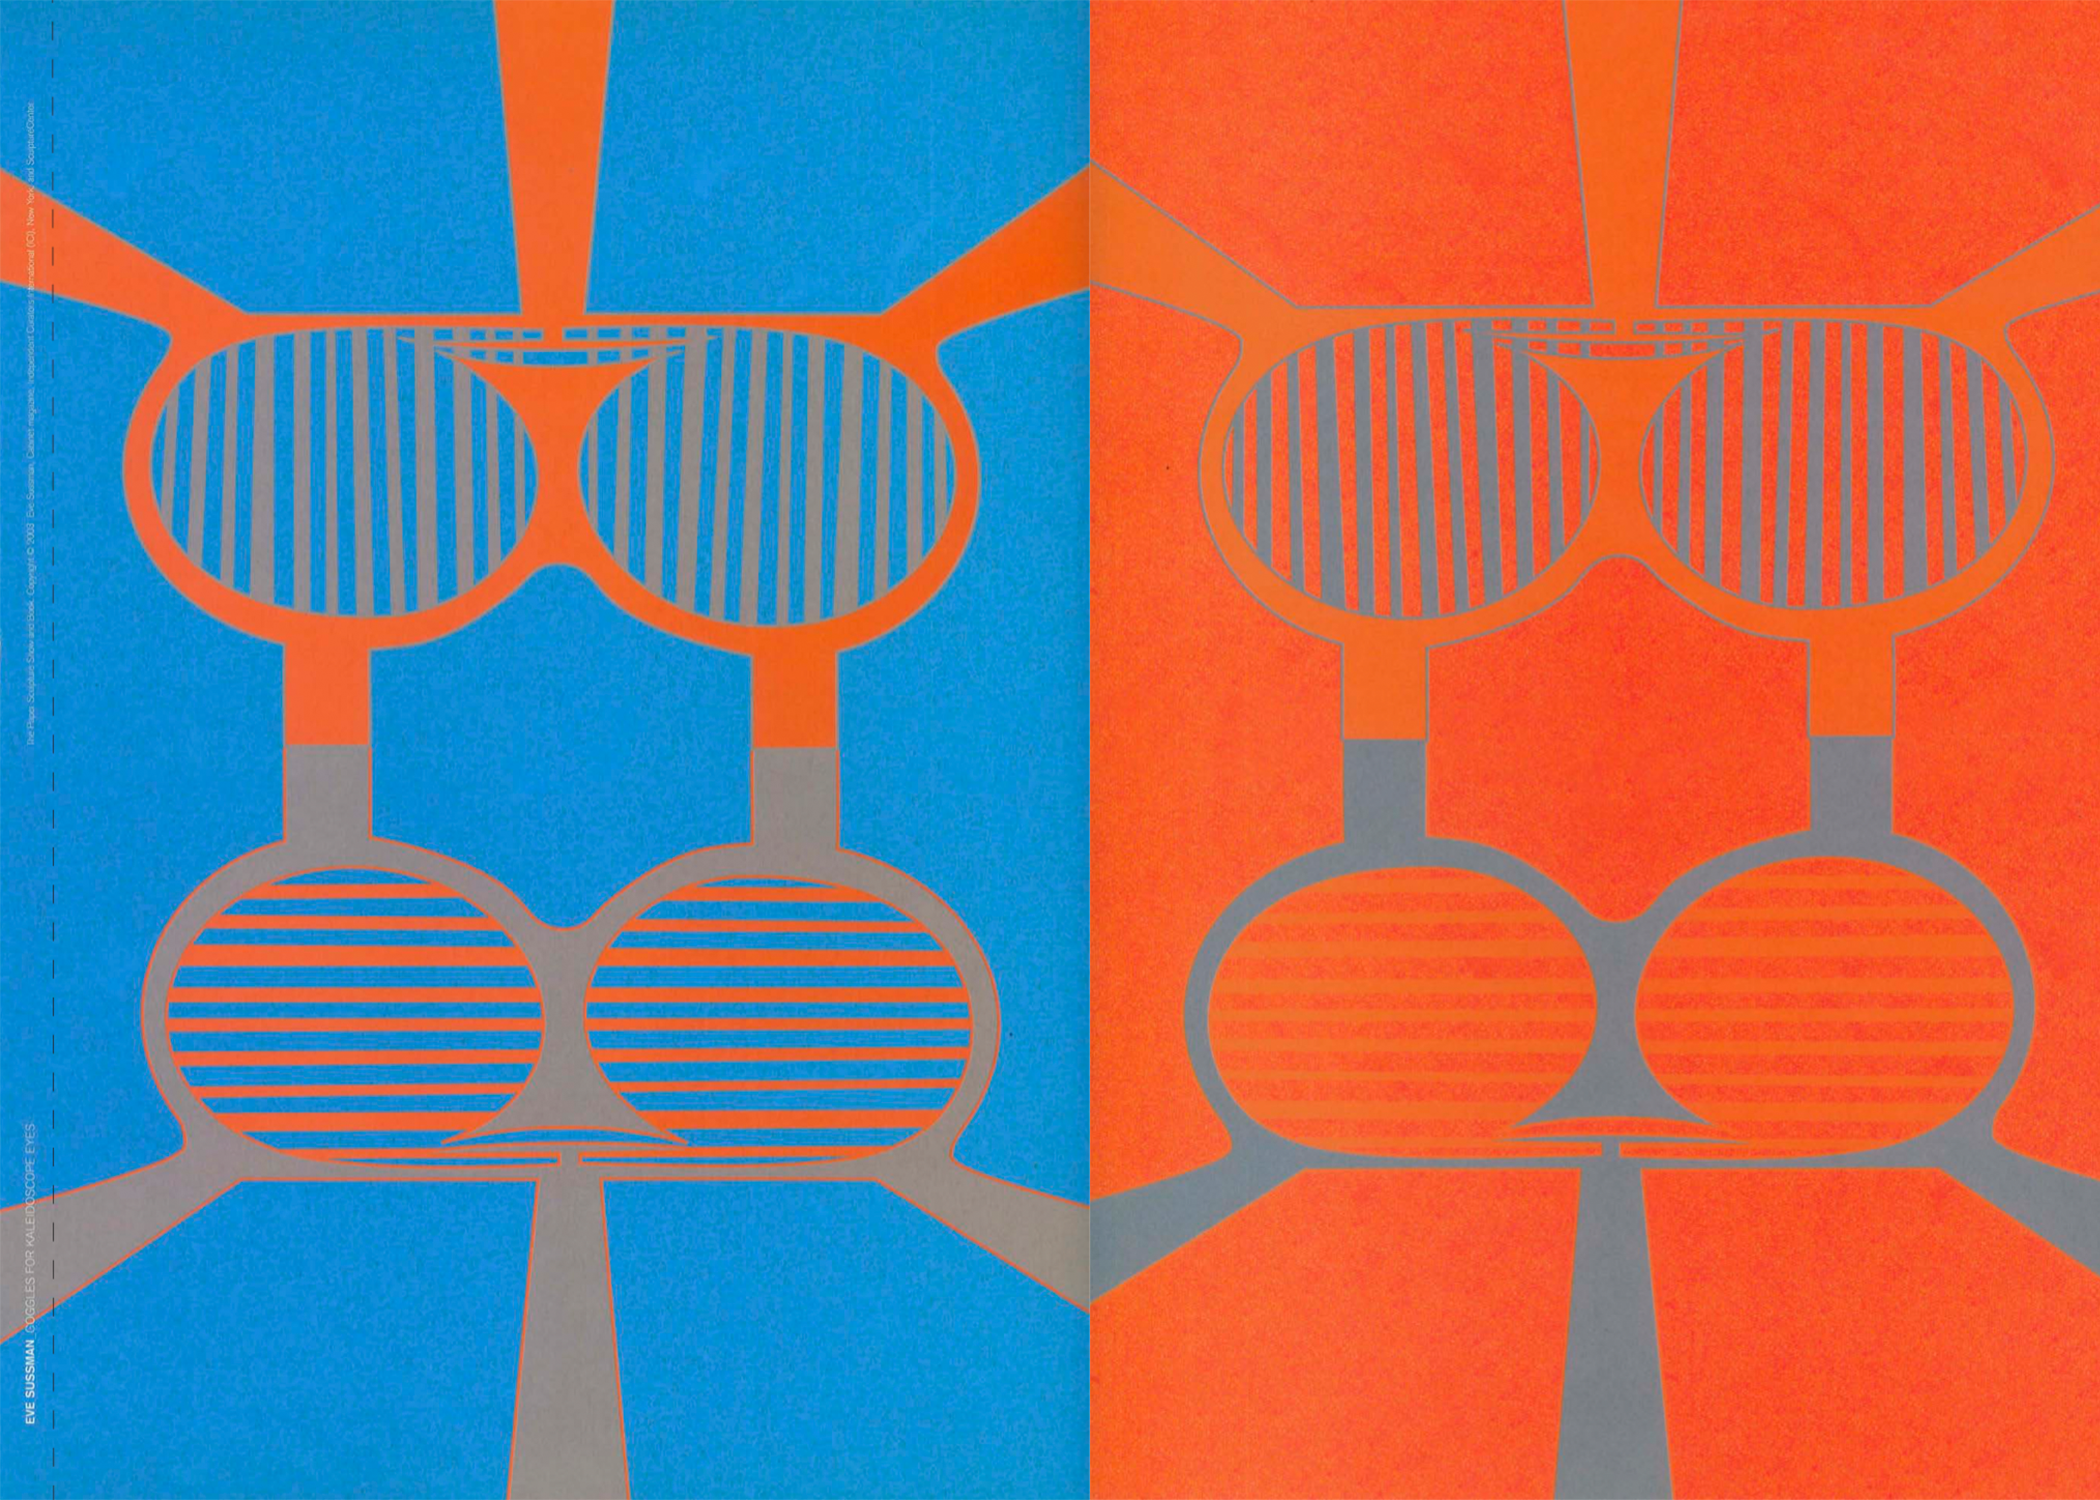 Eve Sussman's Goggles for Kaleidoscope Eyes, print divided in to an orange and blue half with symmetrical goggles in each quarter